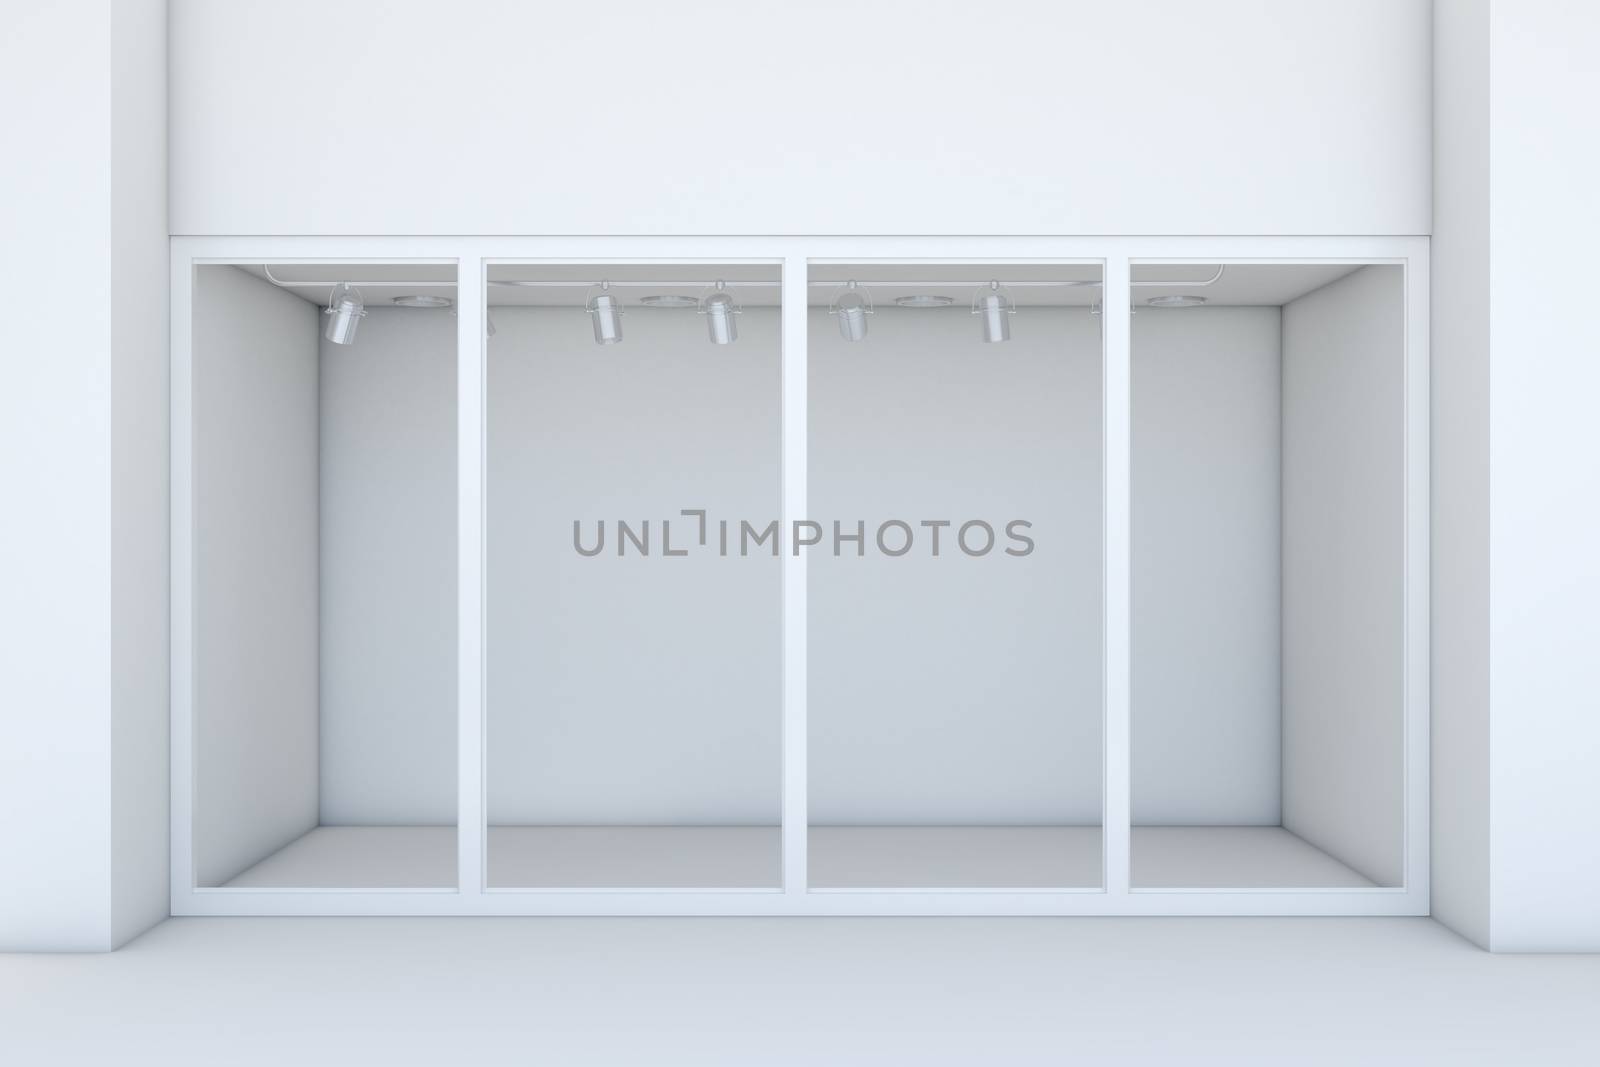 Shopfront with large windows. White store facade. 3d rendering